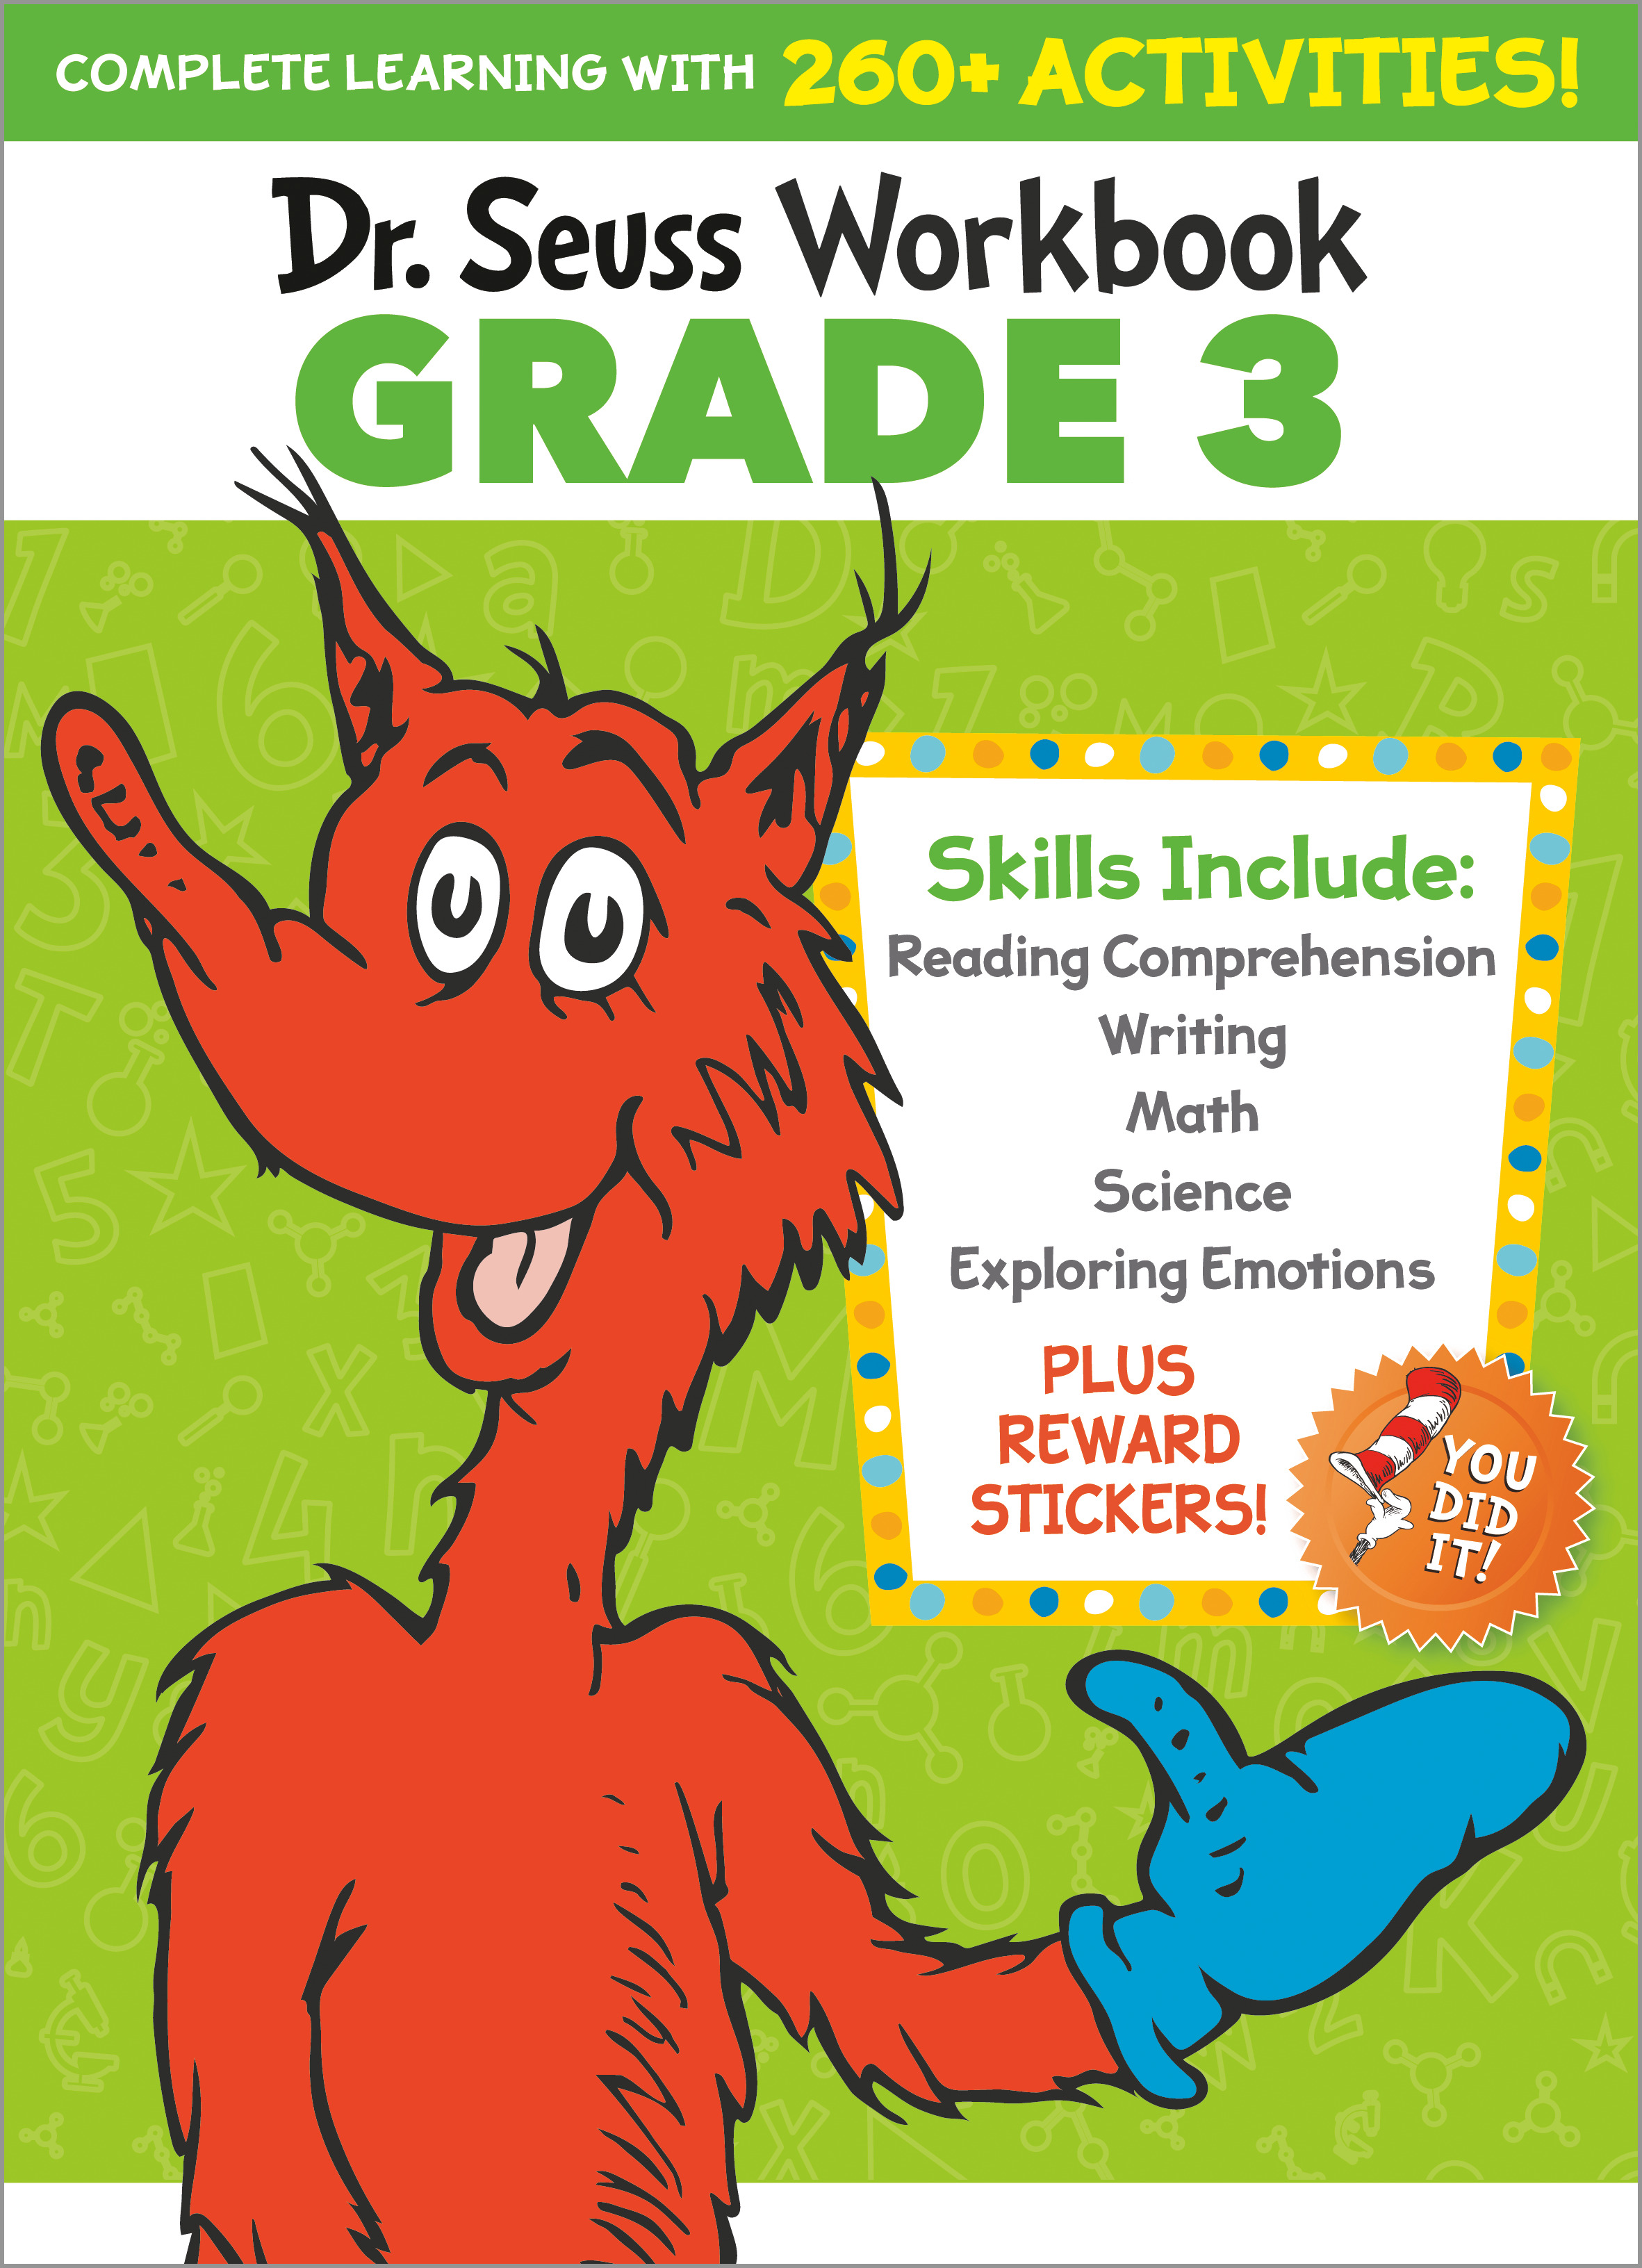 Dr. Seuss Workbook: Grade 3 : 260+ Fun Activities with Stickers and More! (Language Arts, Vocabulary, Spelling, Reading Comprehension, Writing, Math, Multiplication, Science, SEL) | Activity book